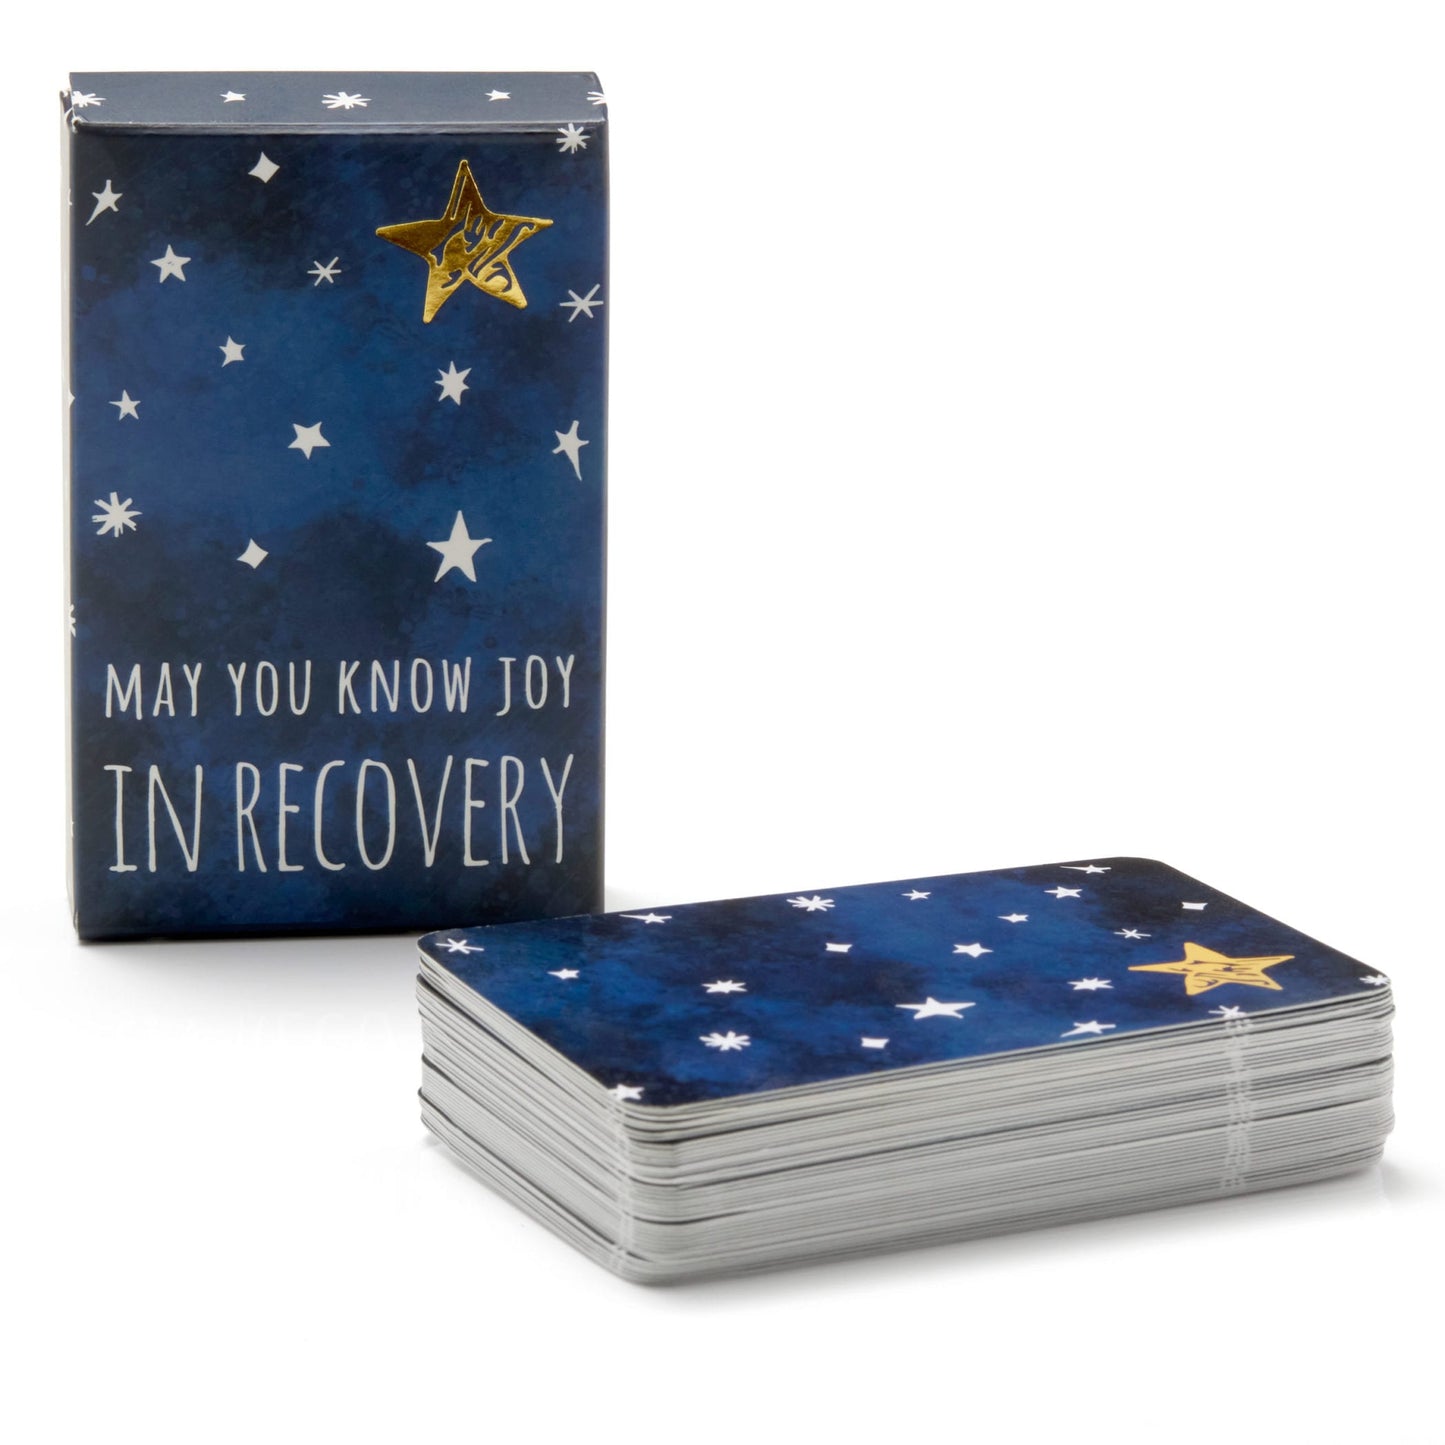 May You Know Recovery